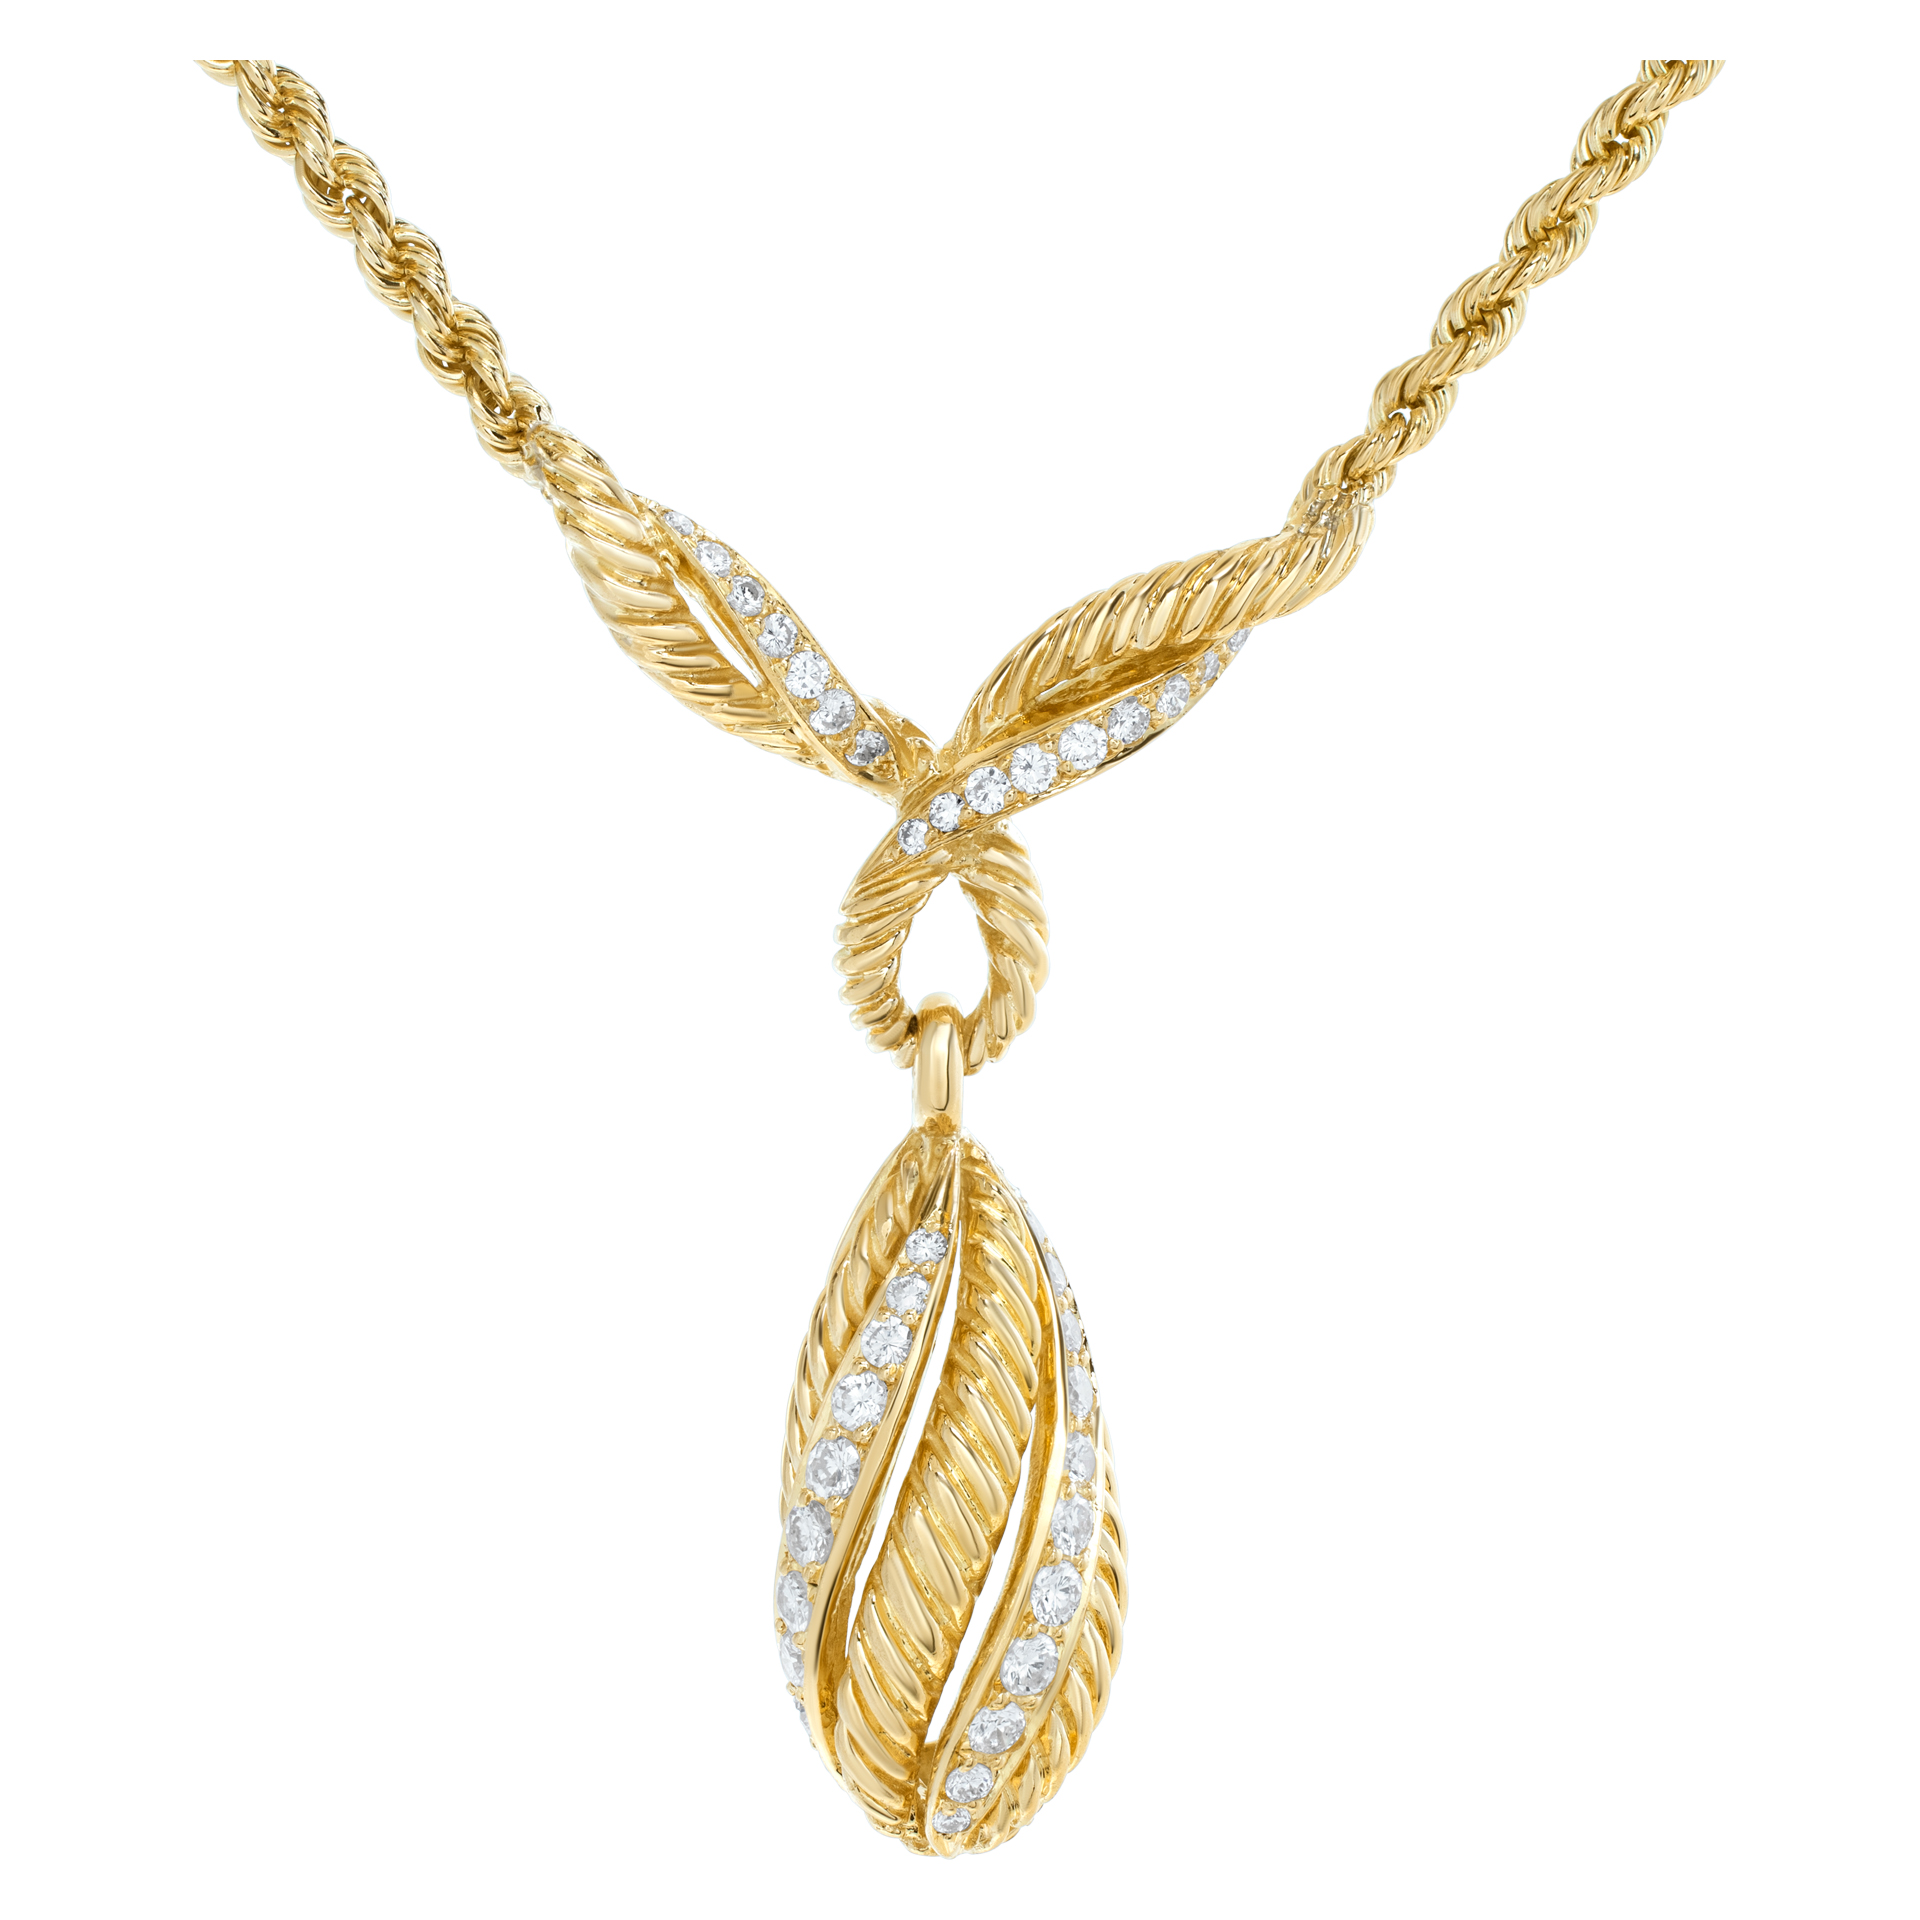 Diamond drop pendant chain/necklace stamped "Cartier" in 18k yellow gold. Diamonds total Approx. Weight: 1.00 carat.